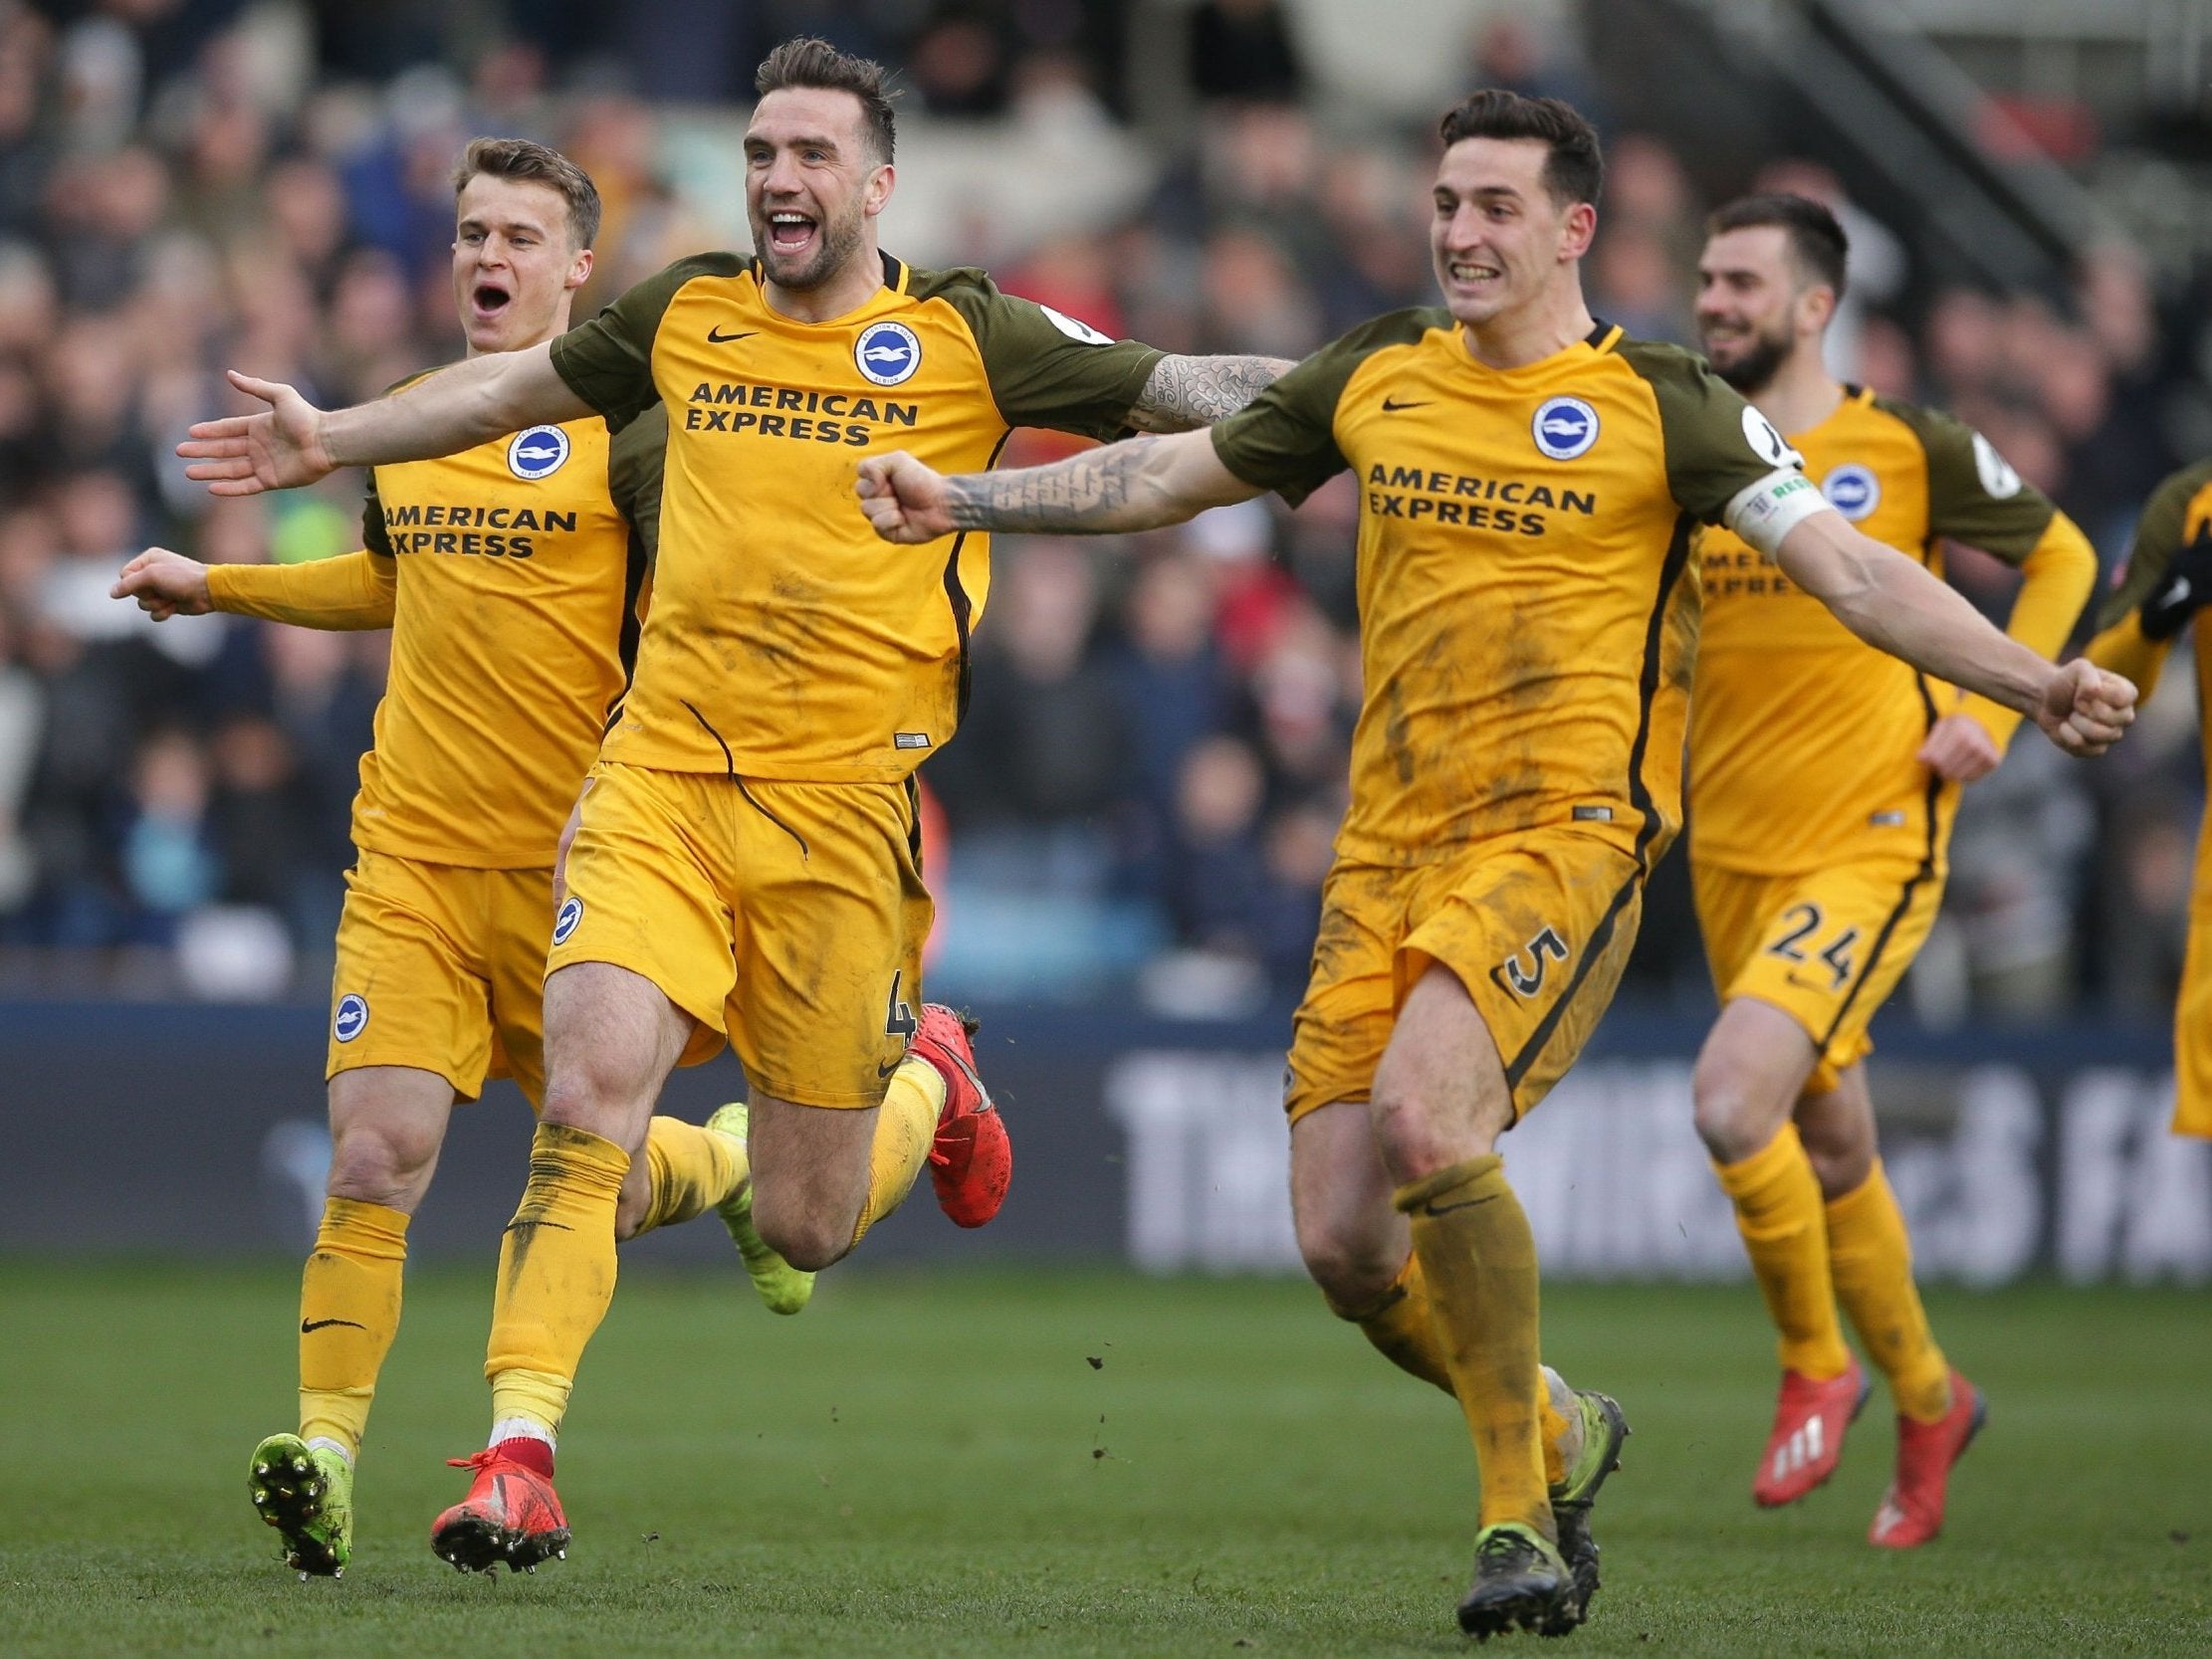 Solly March (L), Shane Duffy (C) and Lewis Dunk (R) celebrate as Millwall's Jake Cooper misses his penalty